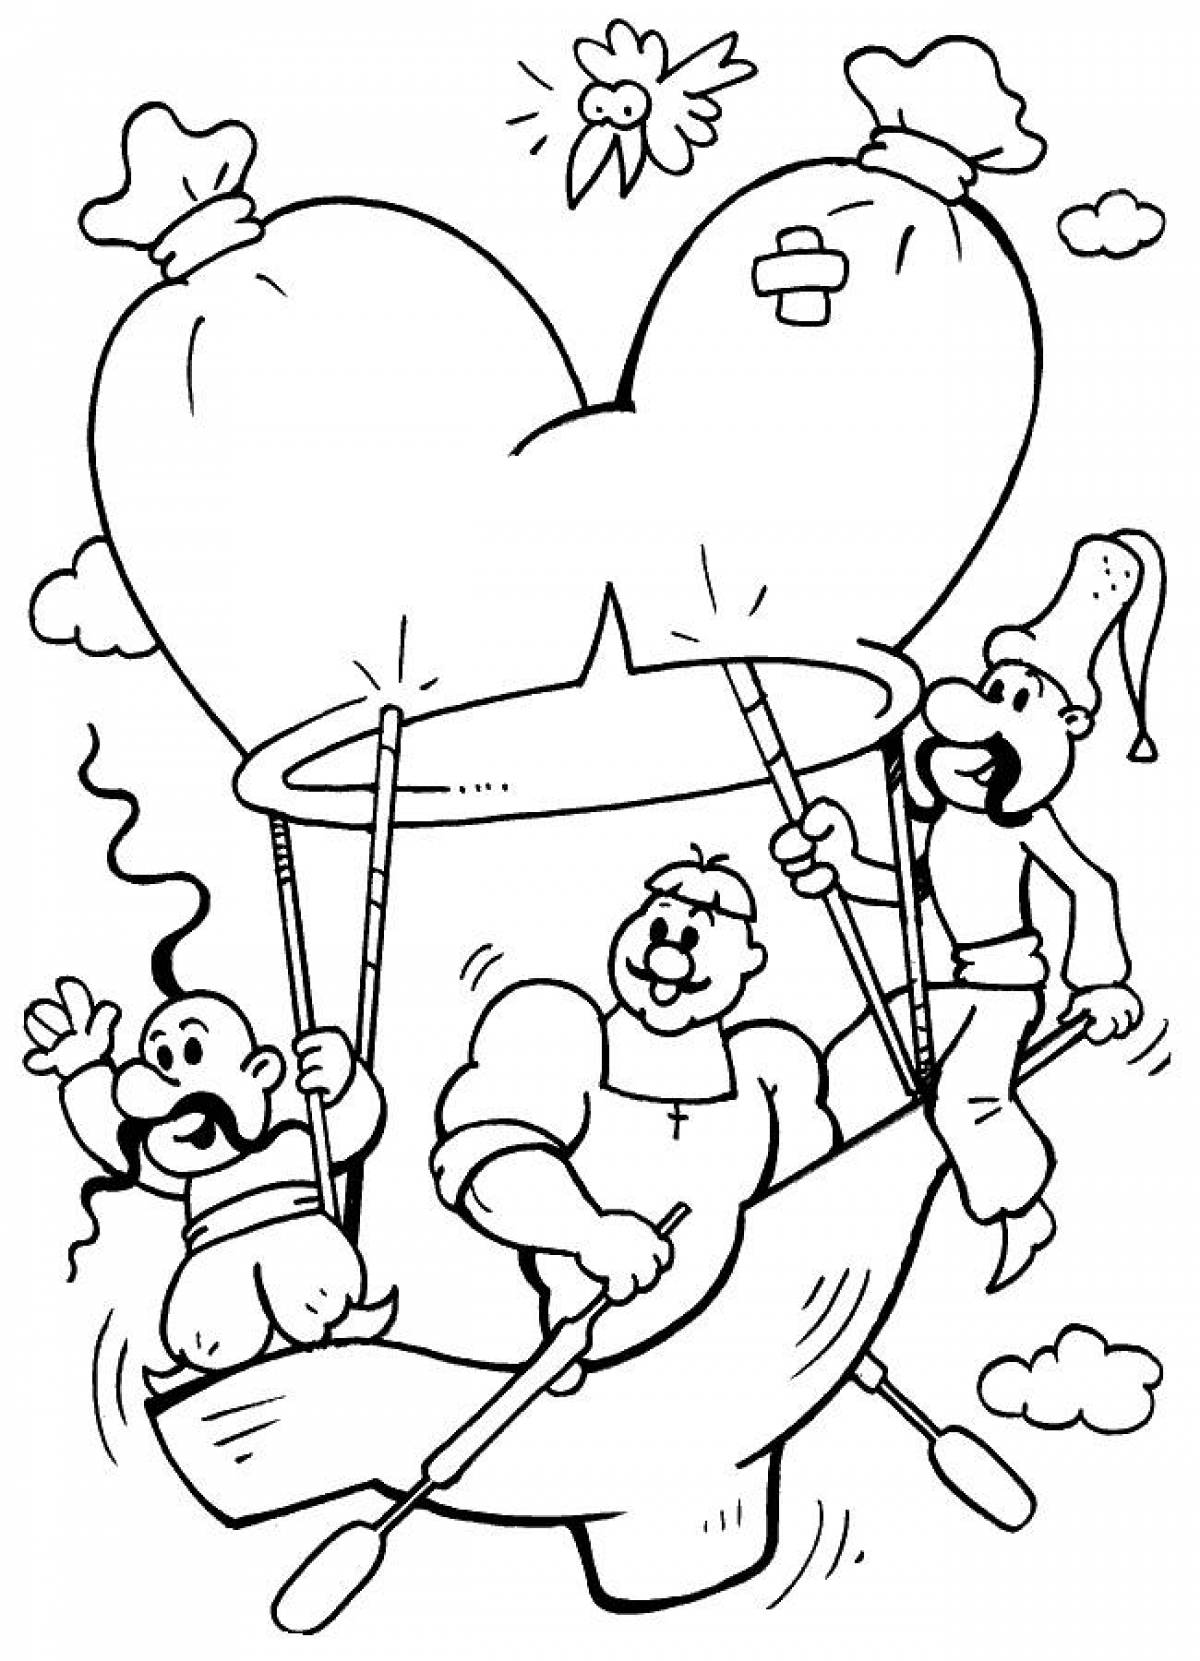 Cossacks coloring page